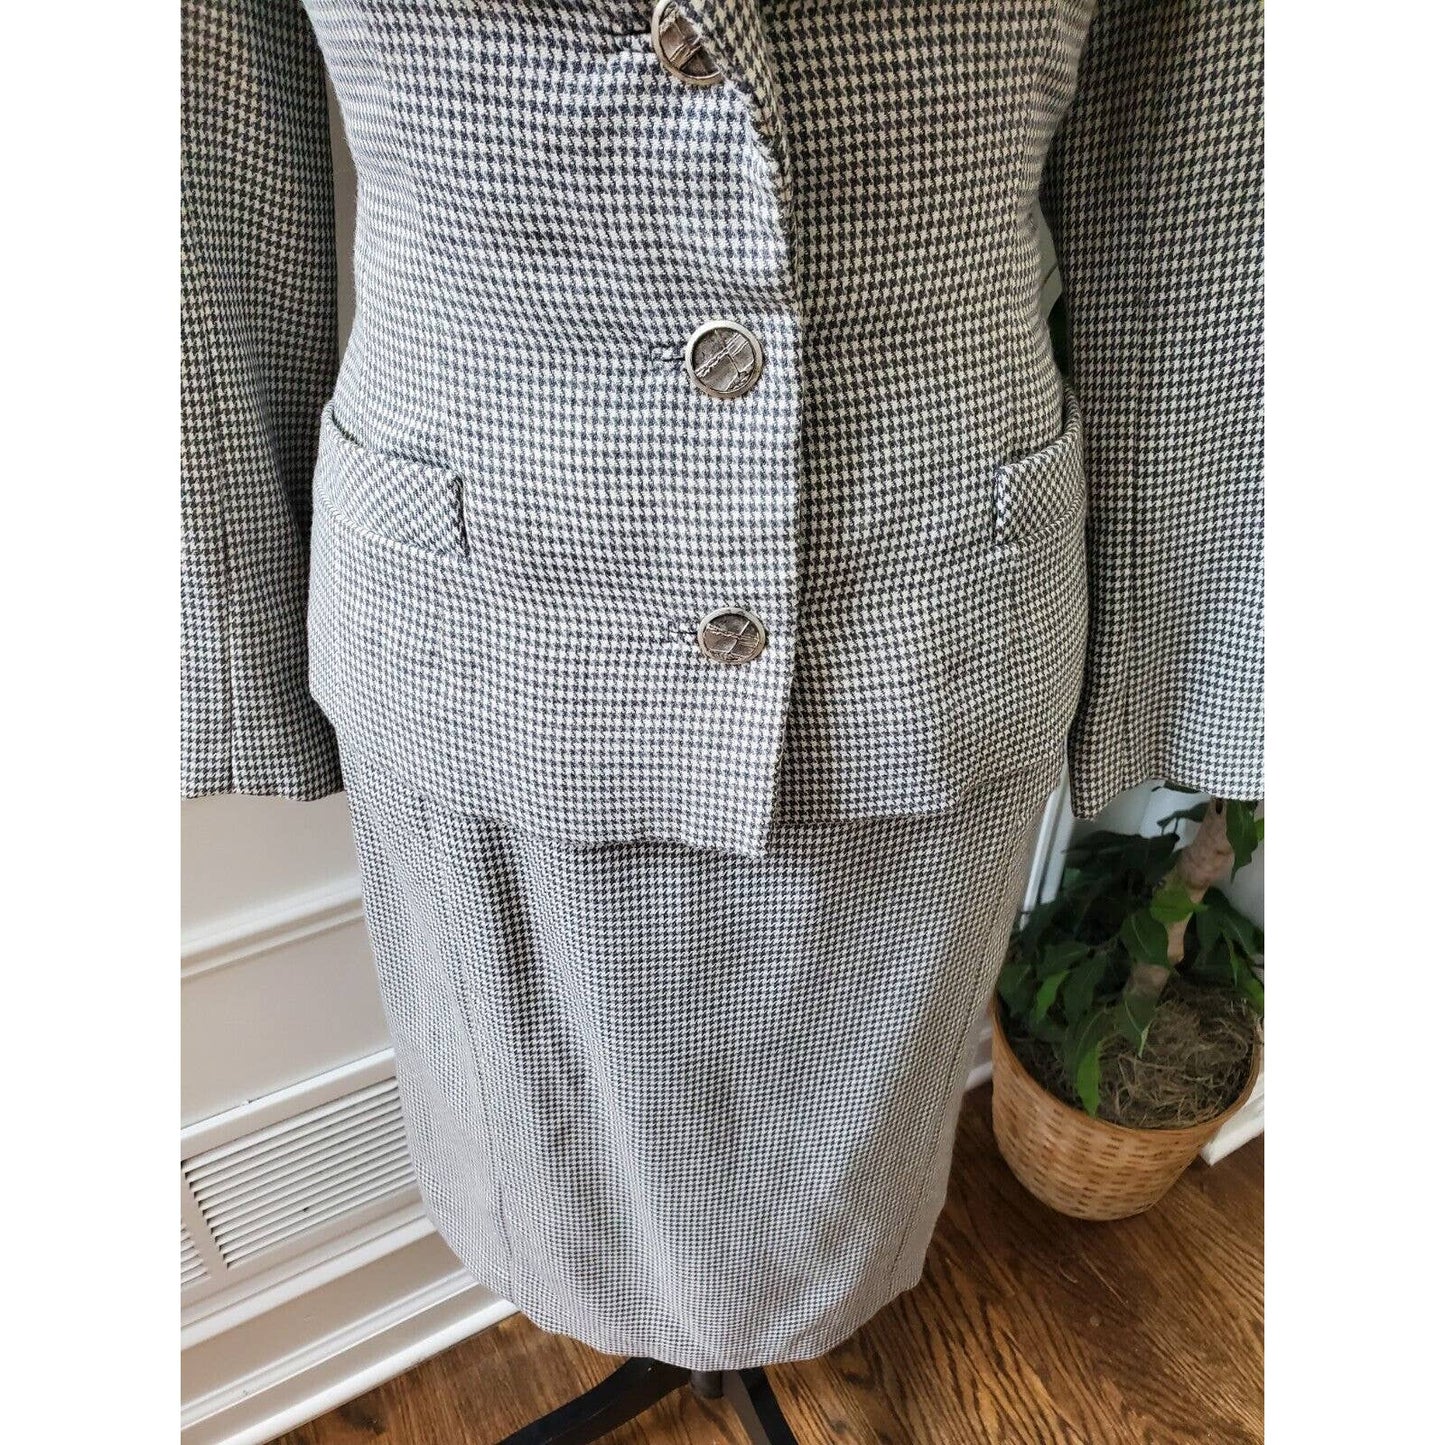 Vintage Sophie Nunziato Gray Polyester Long Sleeve Jacket & Skirt 2 Piece Suit 6